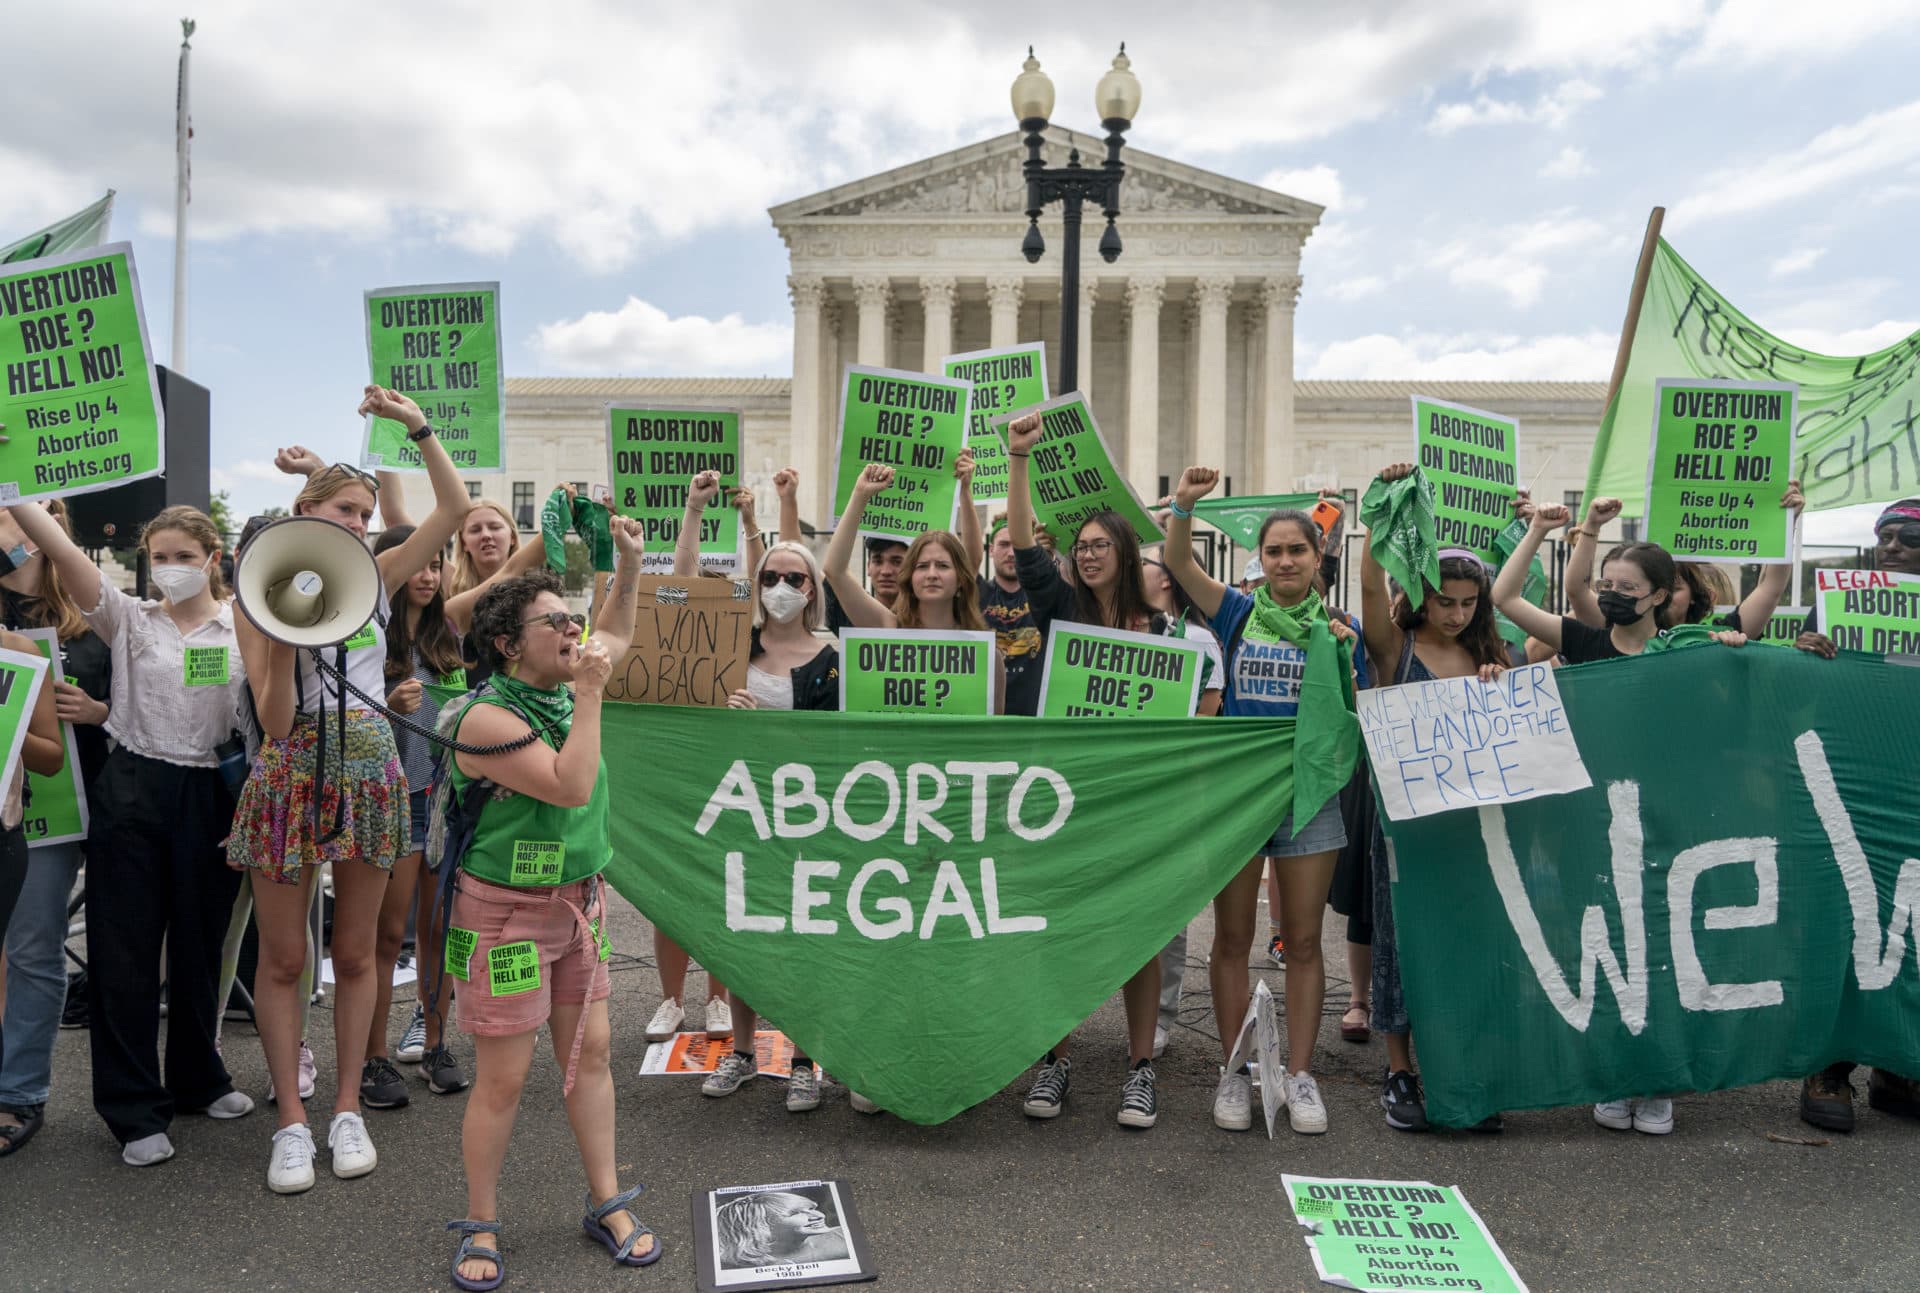 Abortion-rights protesters express themselves after the Supreme Court announced its decision Friday morning to overturn Roe v. Wade. (Gemunu Amarasinghe/AP)